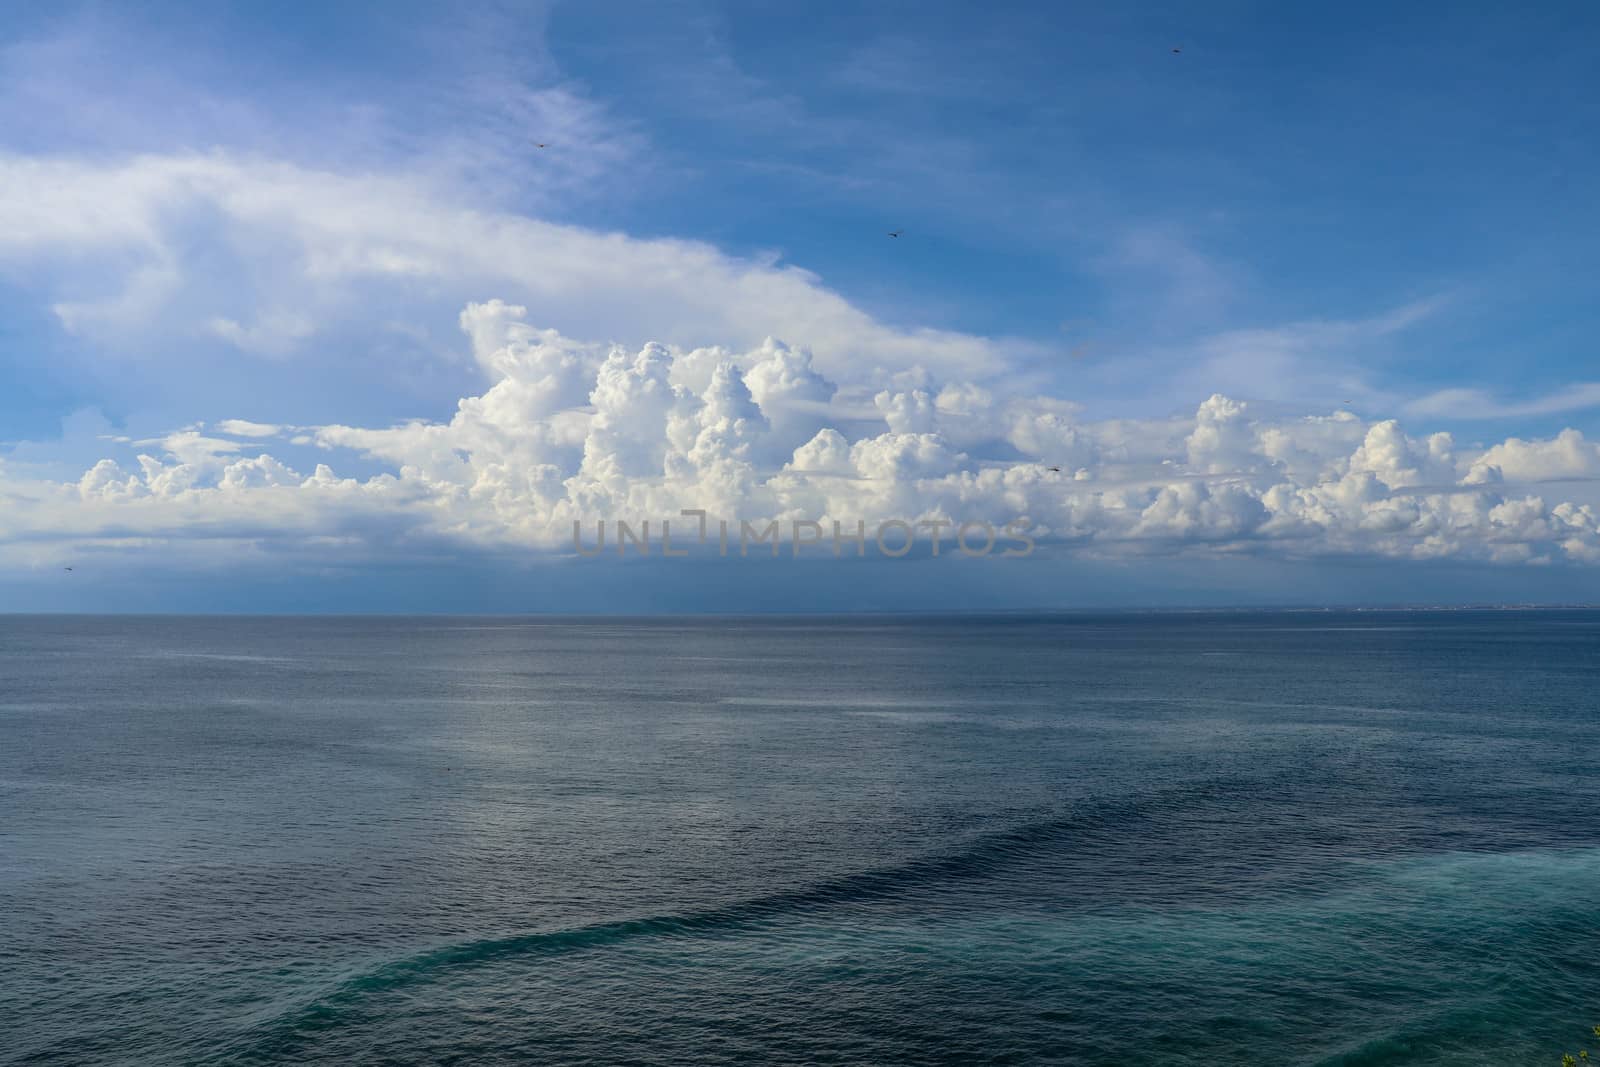 Calm sea and blue sky from the side of a boat with bow wave wake and cumulonimbus clouds on the horizon